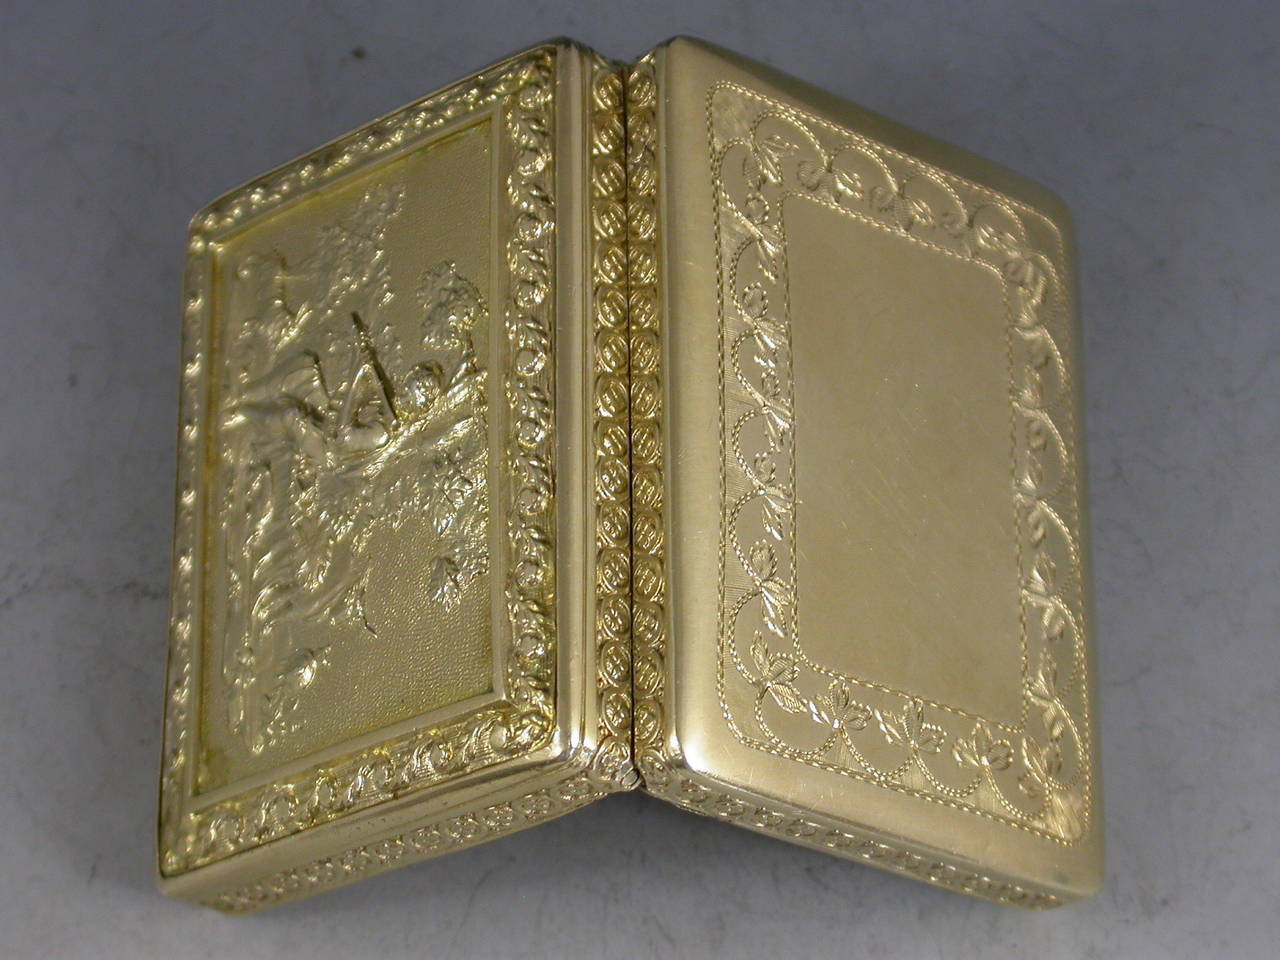 George III Silver Gilt 'Shepherd Boy' Vinaigrette Box with Swan Decorated Grille 2